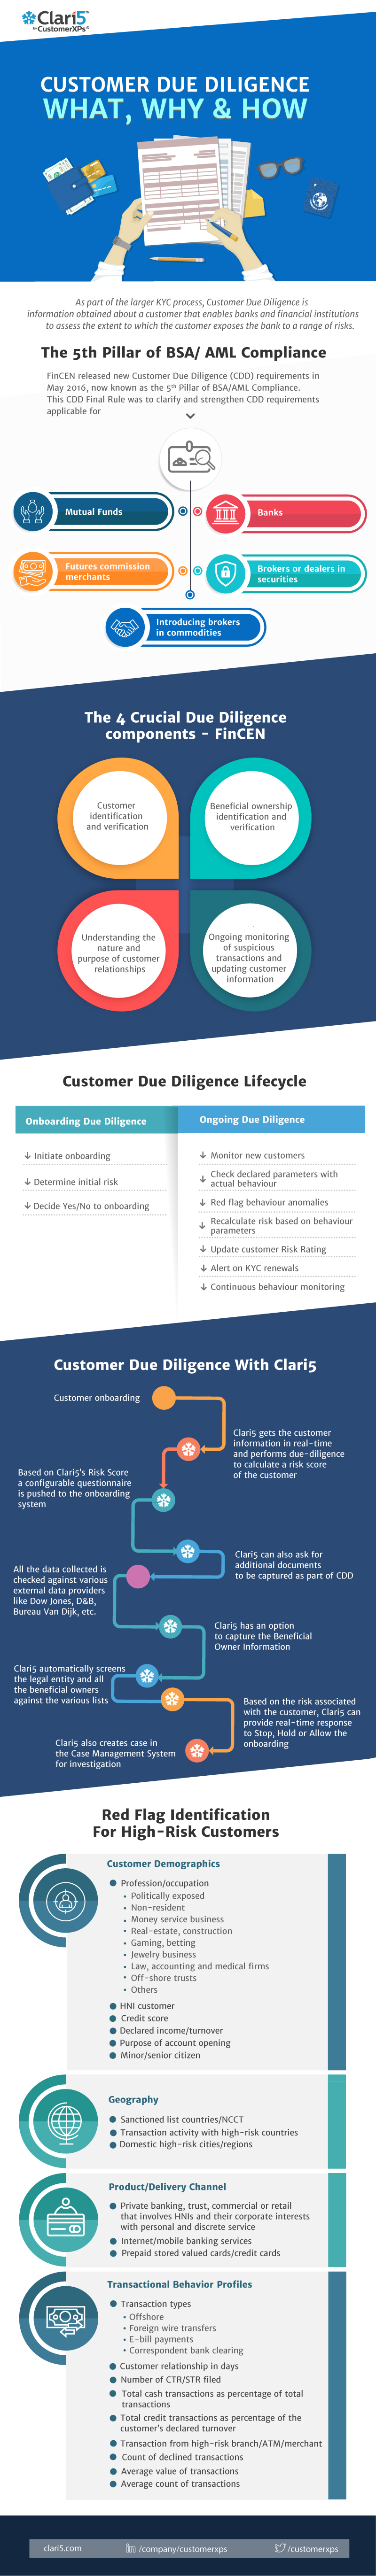 Customer Due Diligence: What, Why & How?